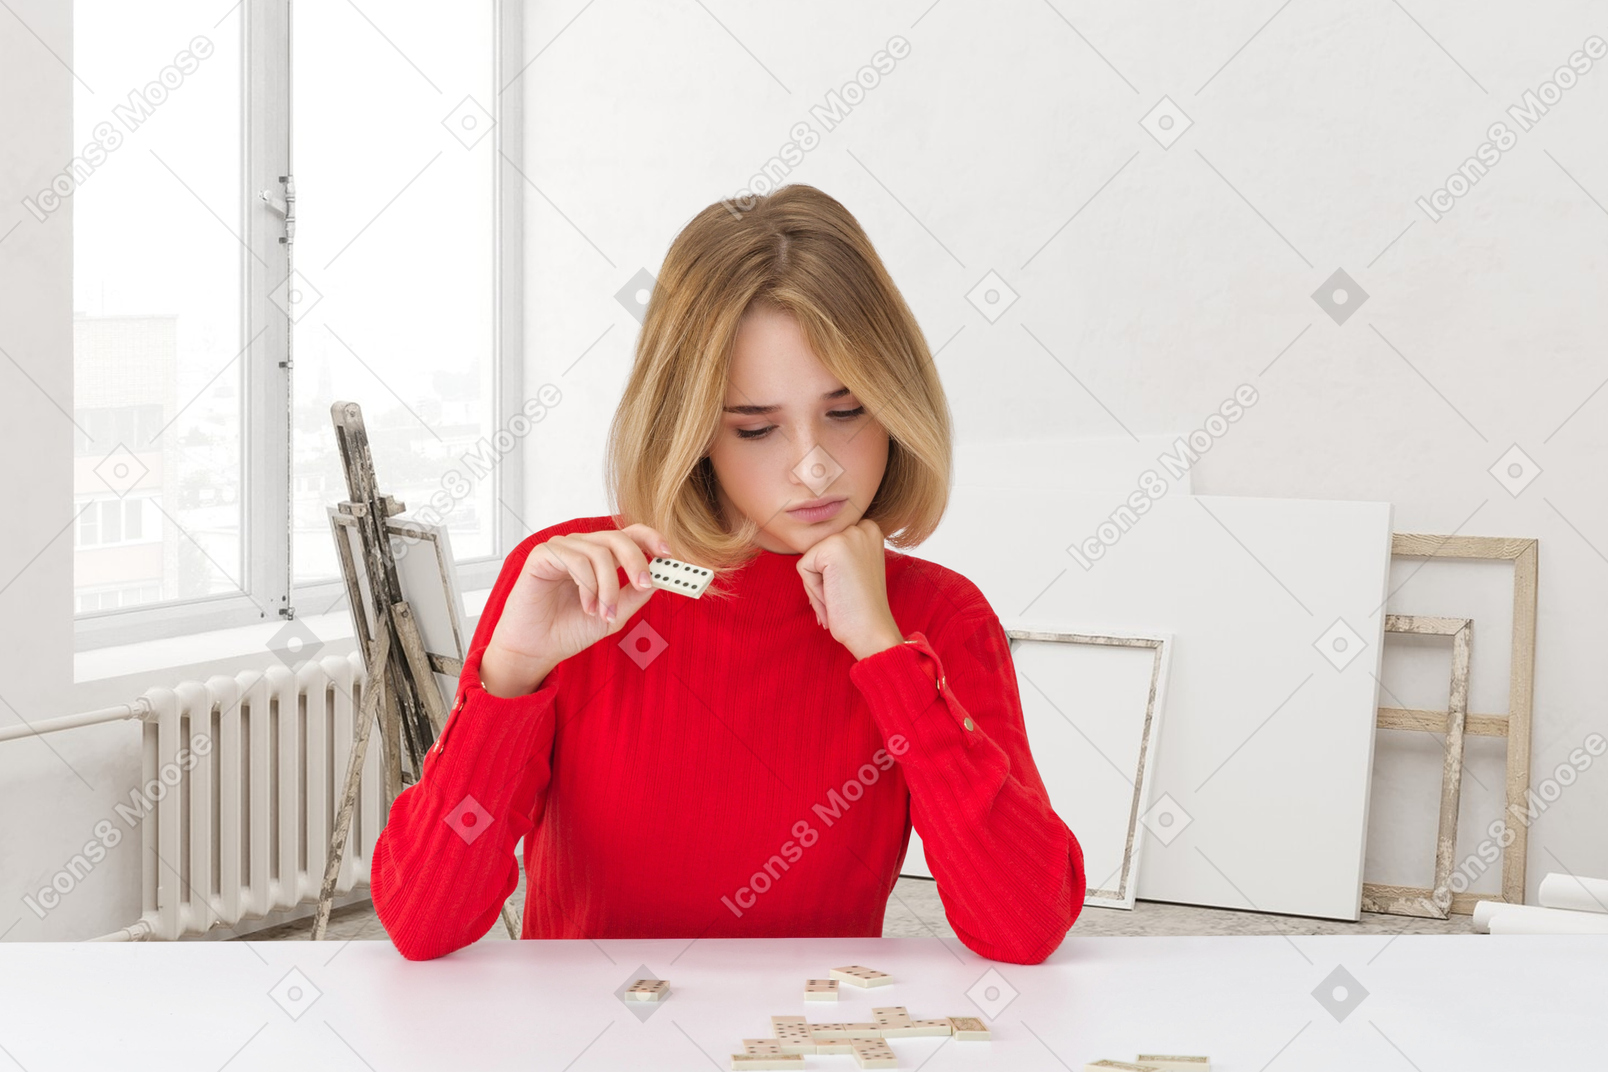 Pensive woman playing dominoes